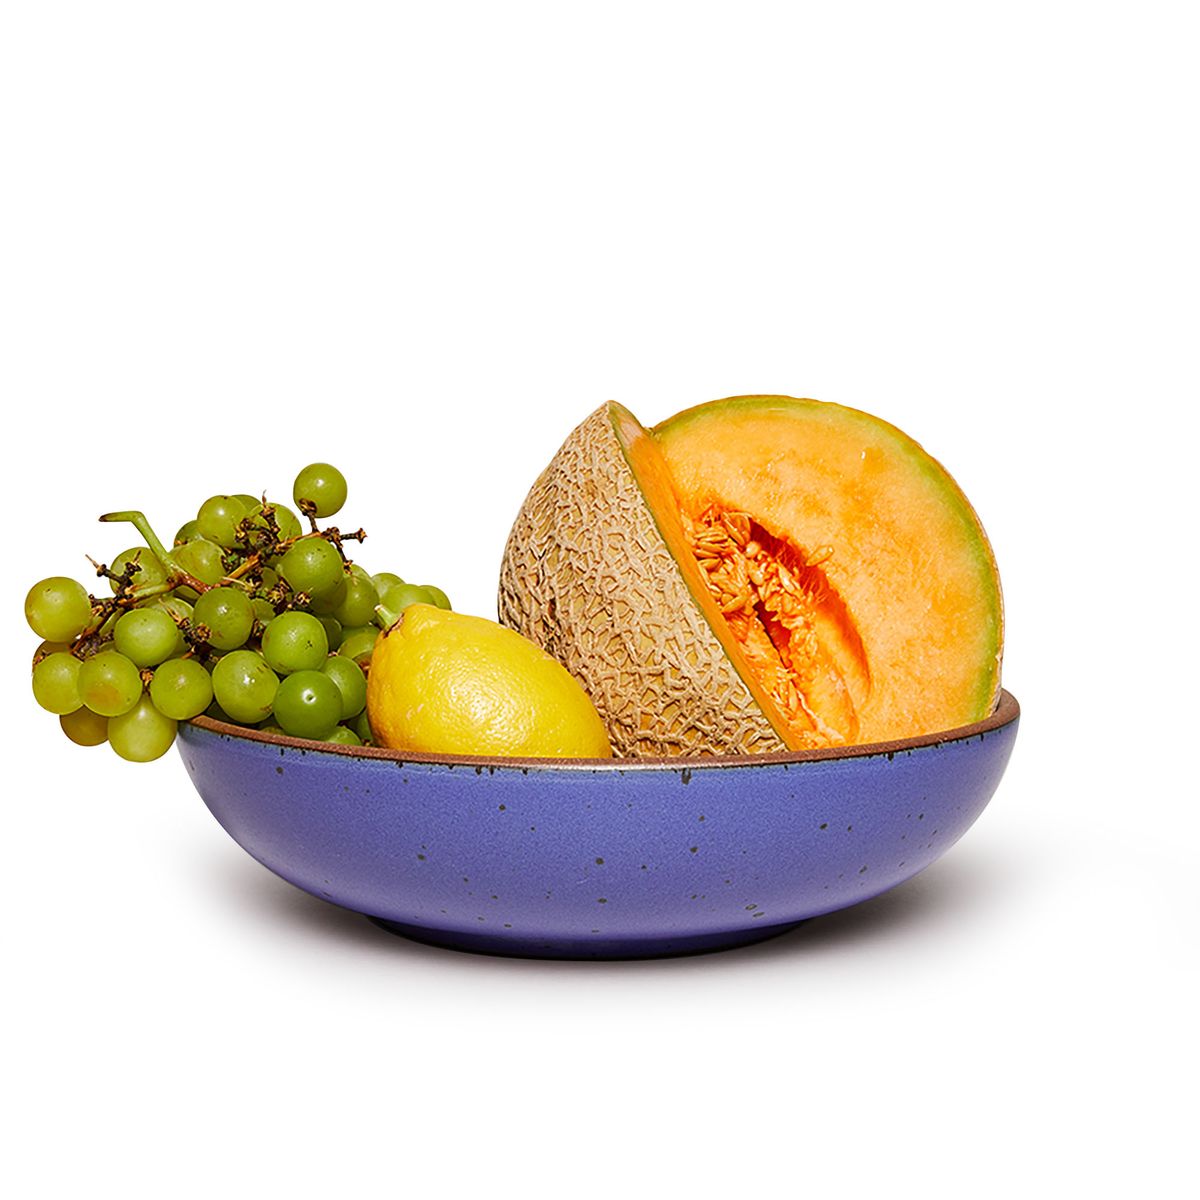 A sliced cantaloupe, whole lemon, and green grapes in a large shallow serving ceramic bowl in a true cool blue color featuring iron speckles and an unglazed rim.